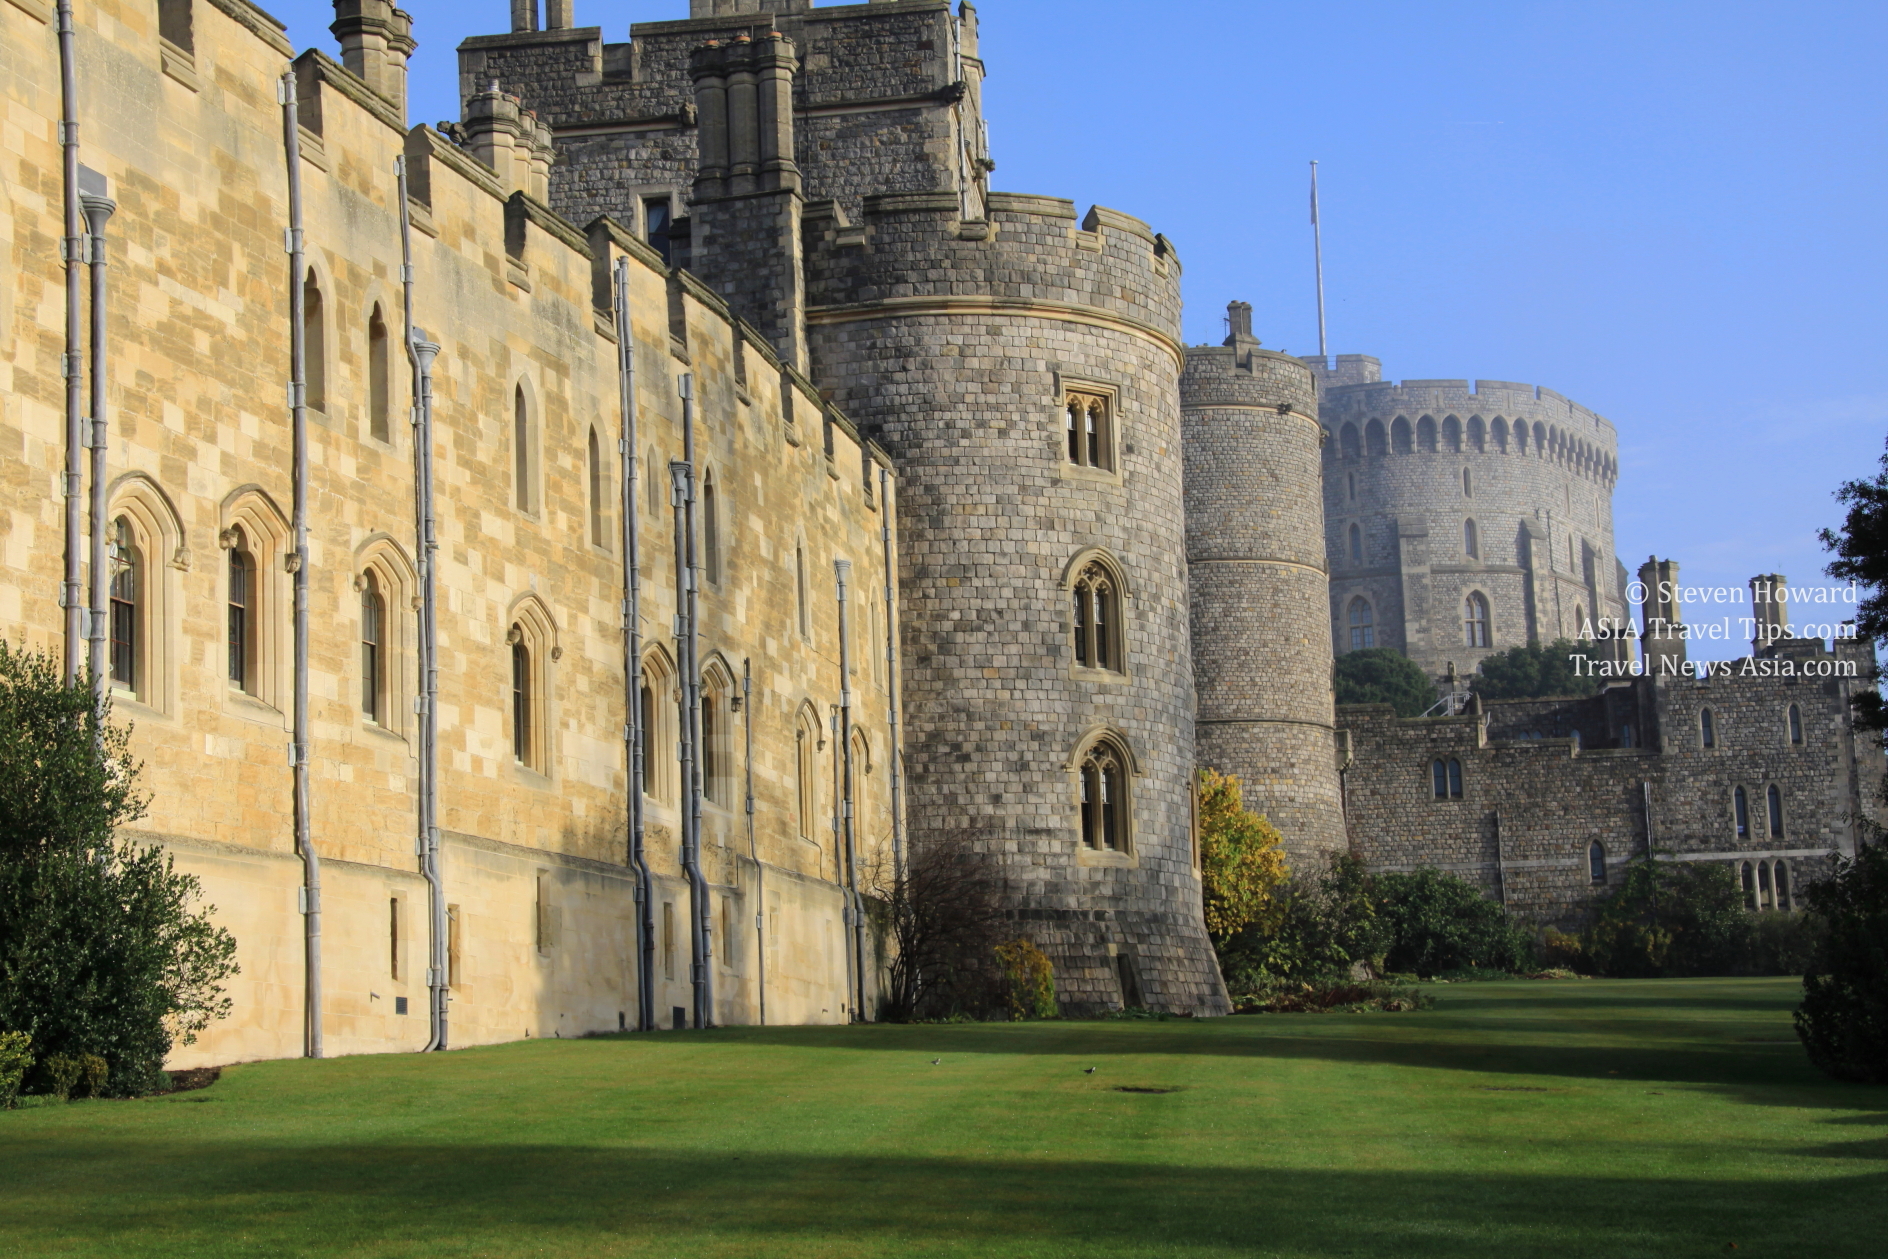 Windsor Castle, England. Picture by Steven Howard of TravelNewsAsia.com Click to enlarge.